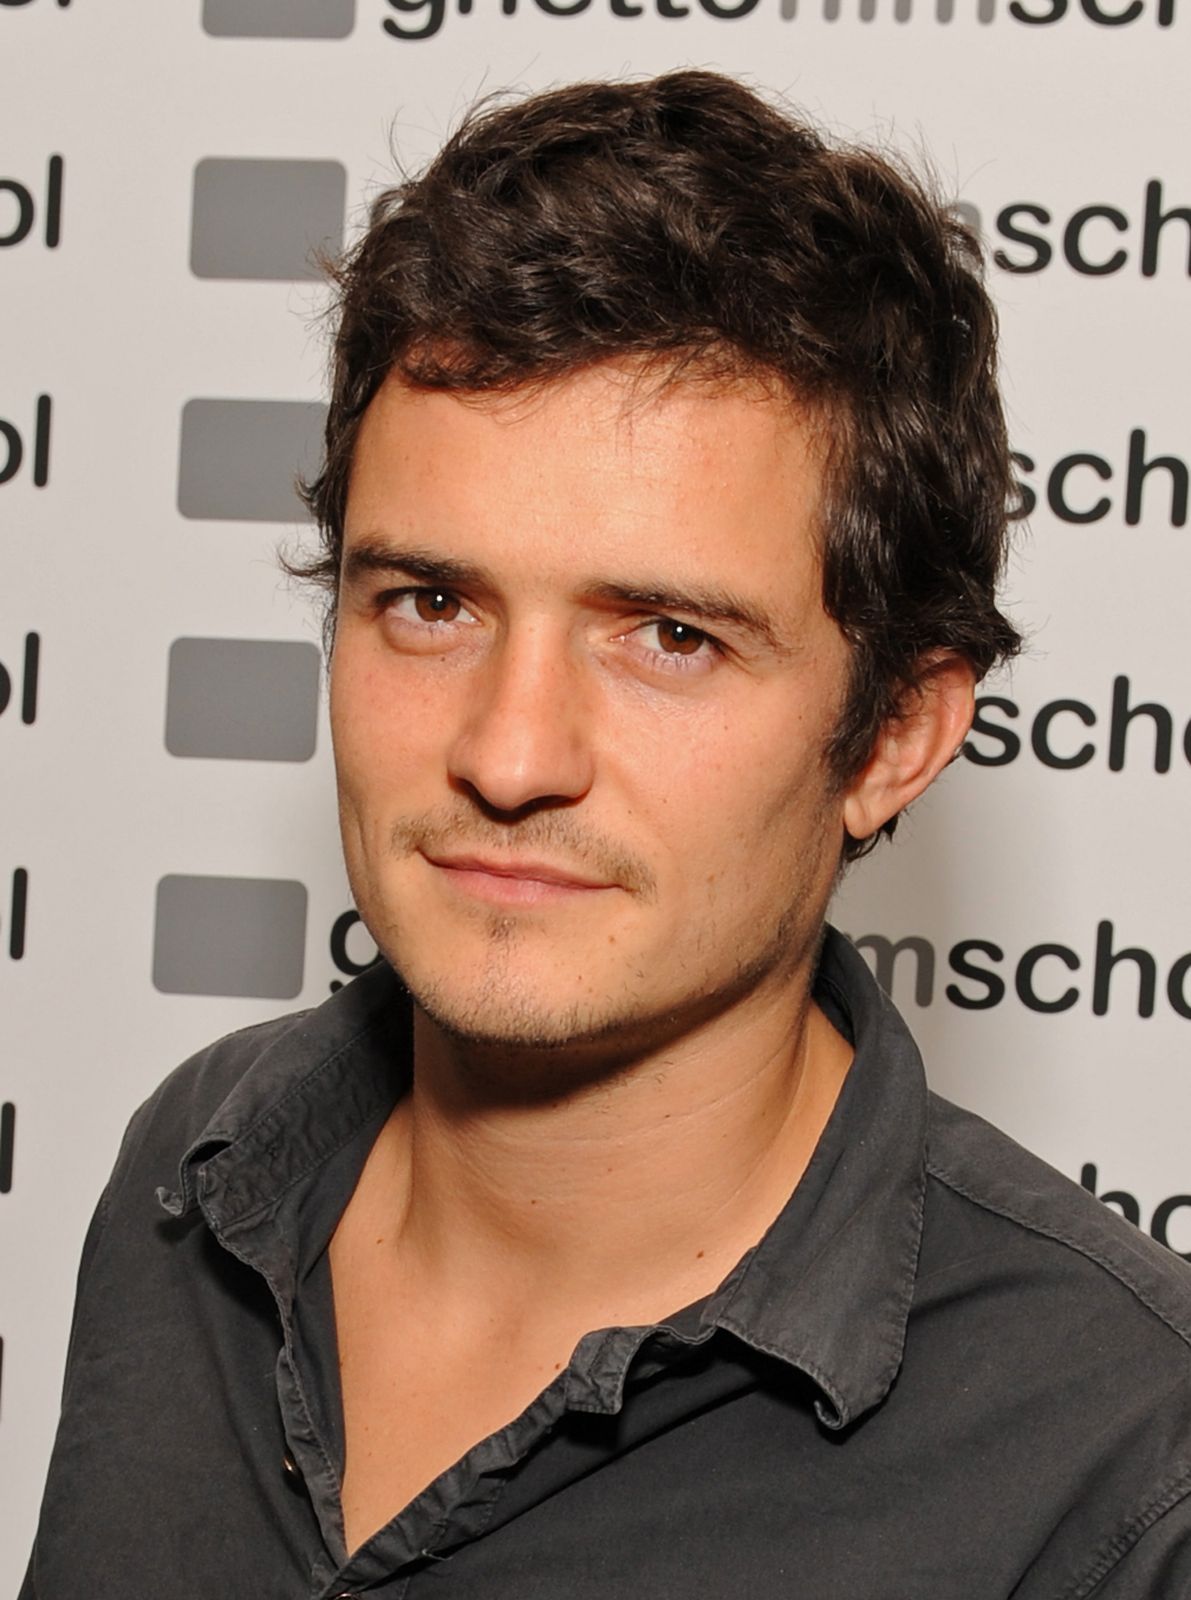 Orlando Bloom Wants Son to Follow His Steps